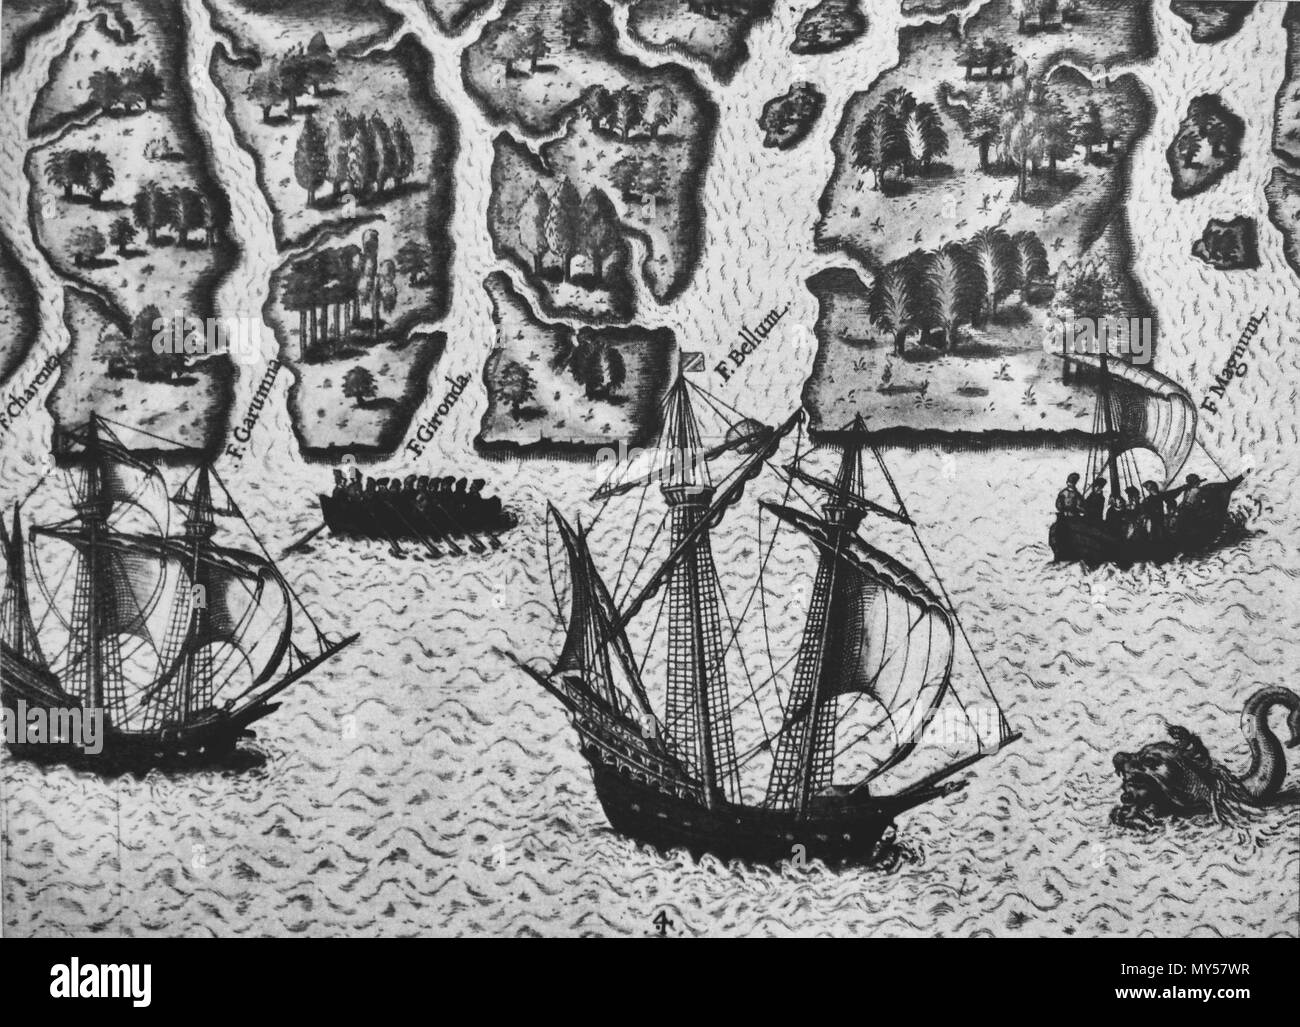 . English: Exploration of Florida by Ribault and Laudonniere 1564 by Le Moyne de Morgues. 16th century. Le Moyne de Morgues 173 Exploration of Florida by Ribault and Laudonniere 1564 by Le Moyne de Morgues Stock Photo